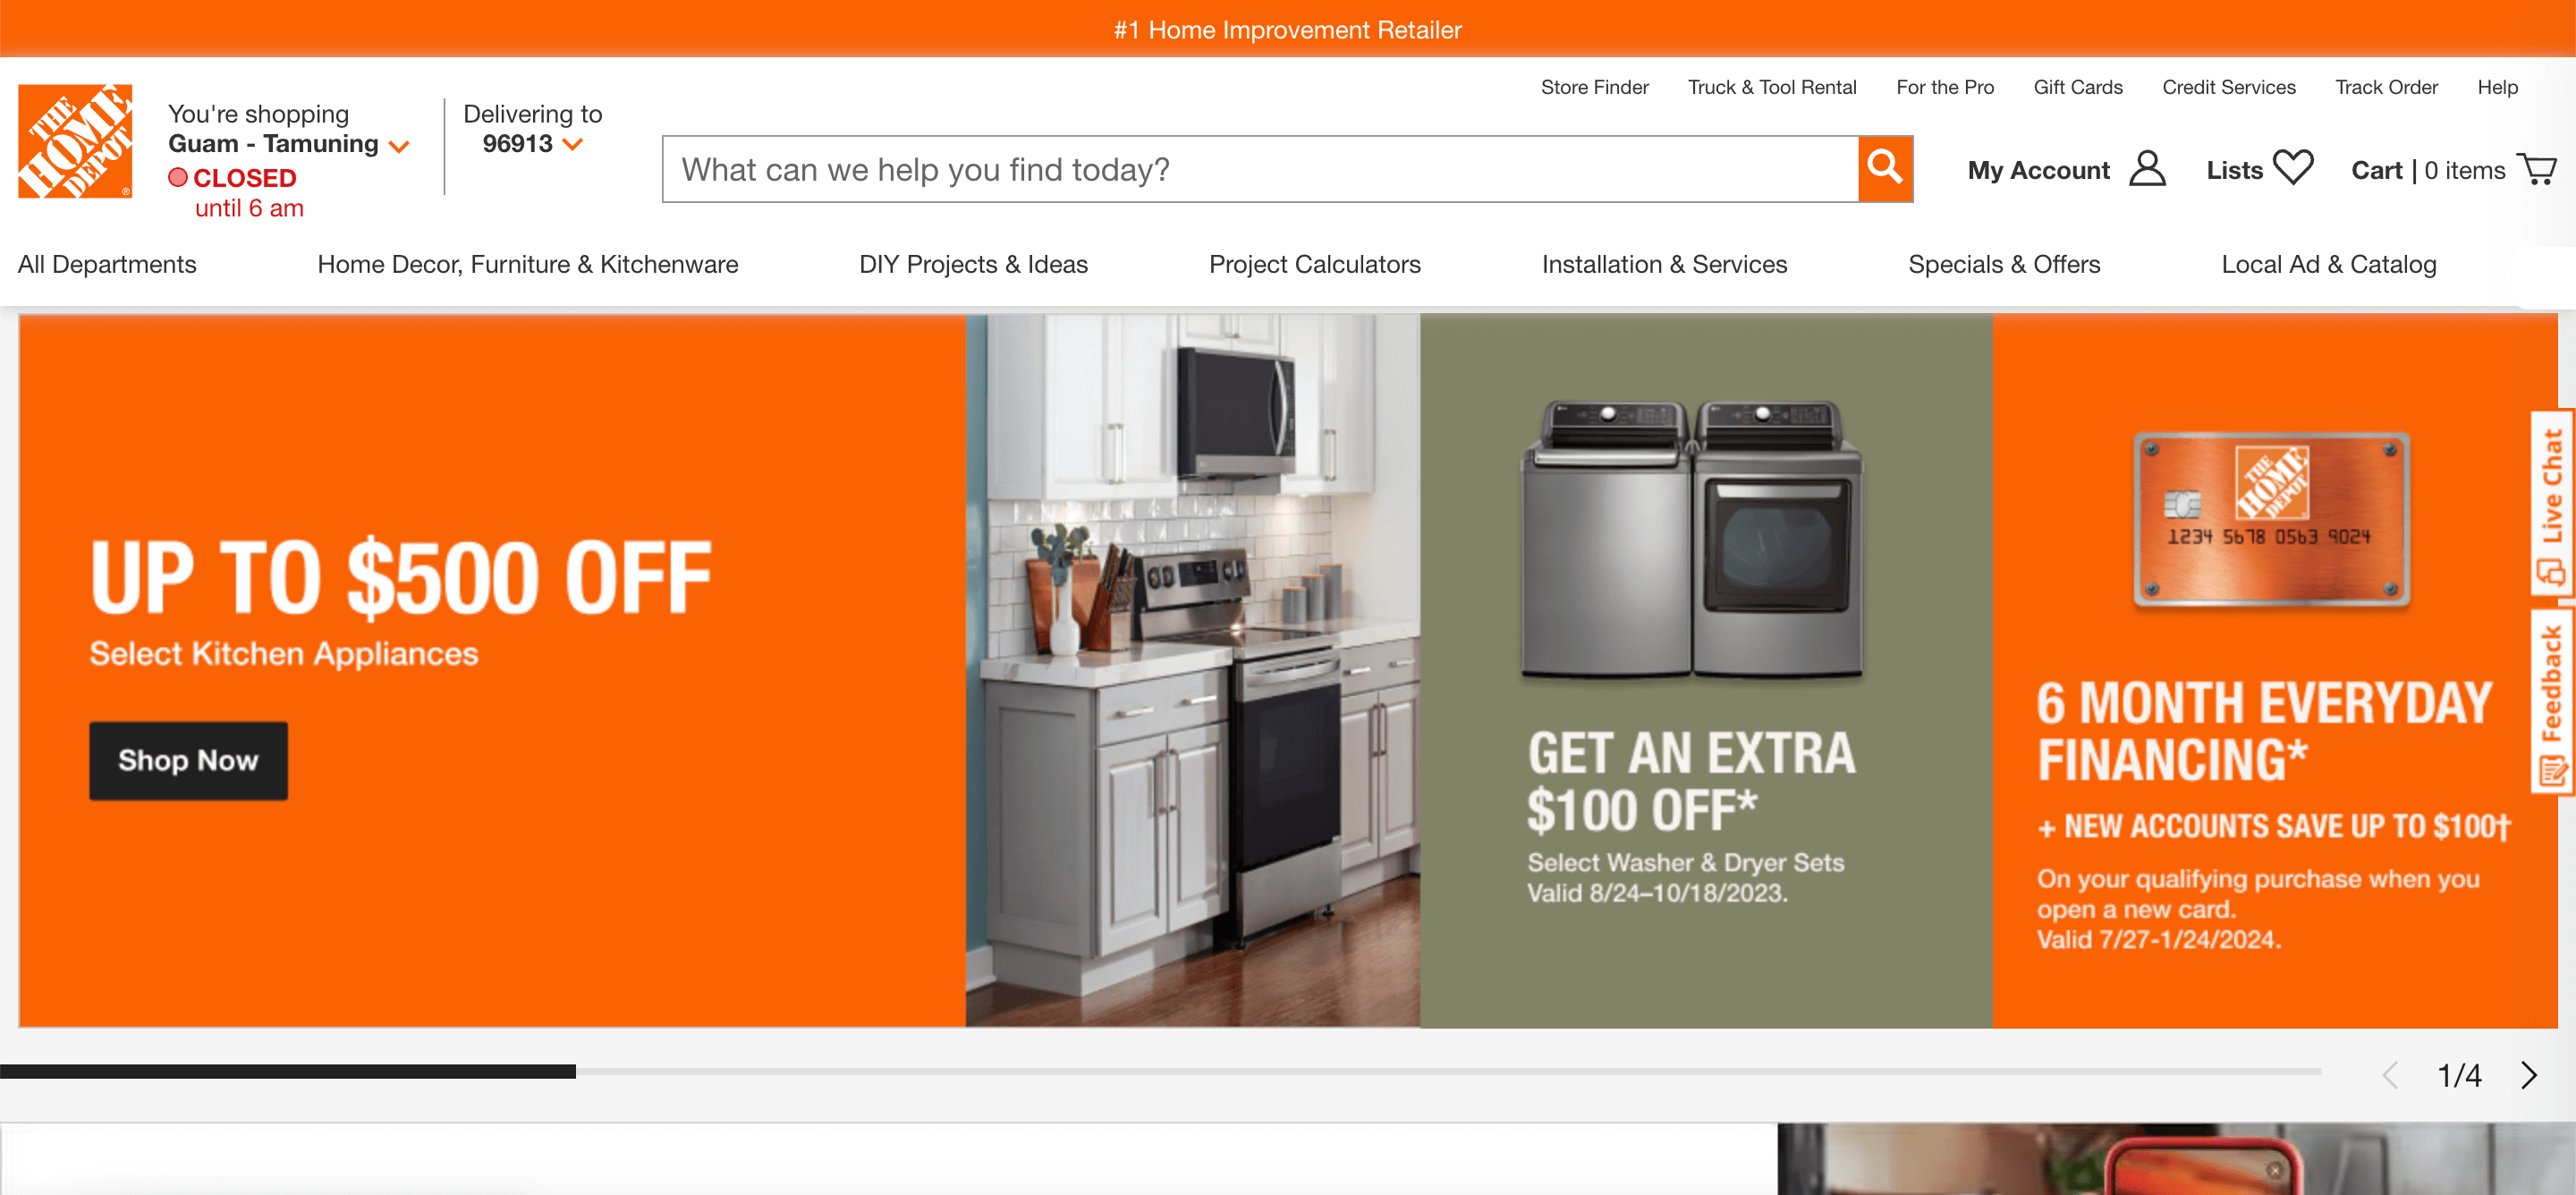 The Home Depot website displaying a prominent image of appliances